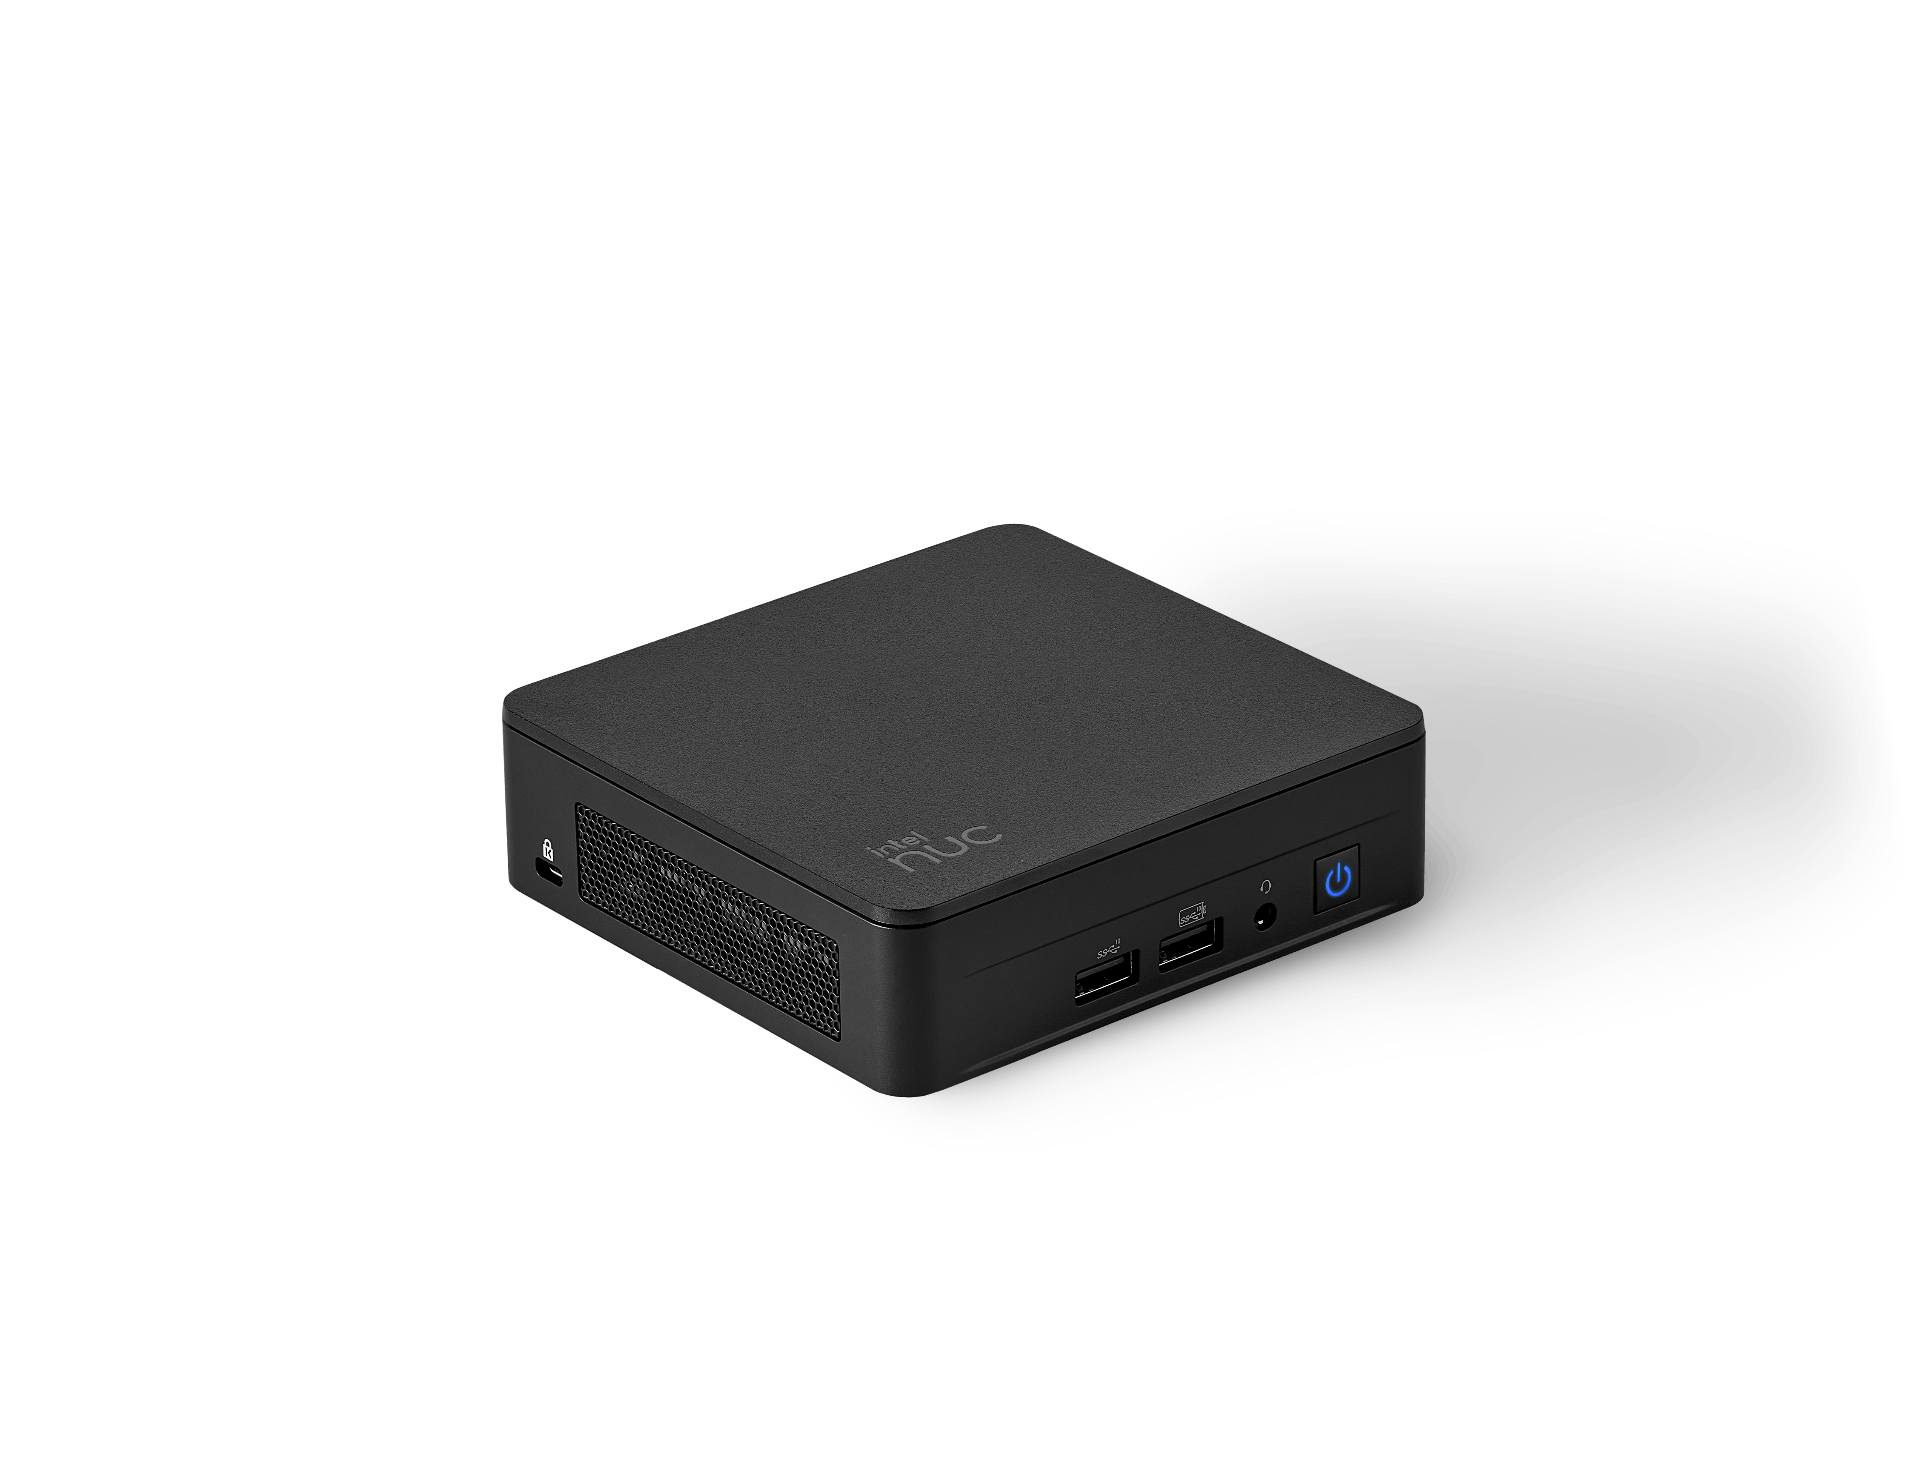  Mini PC Barebone: Intel 13th Gen. NUC, i5-1340P up to 4.60 GHz, 12MB Cache, DDR4(0/2), M.2 Drive, Wi-Fi 6E + Bluetooth, 2xHDMI/2xUSB-C <br><font color='red'>(NO POWER CABLE, optional CB PW 3P power cable)  